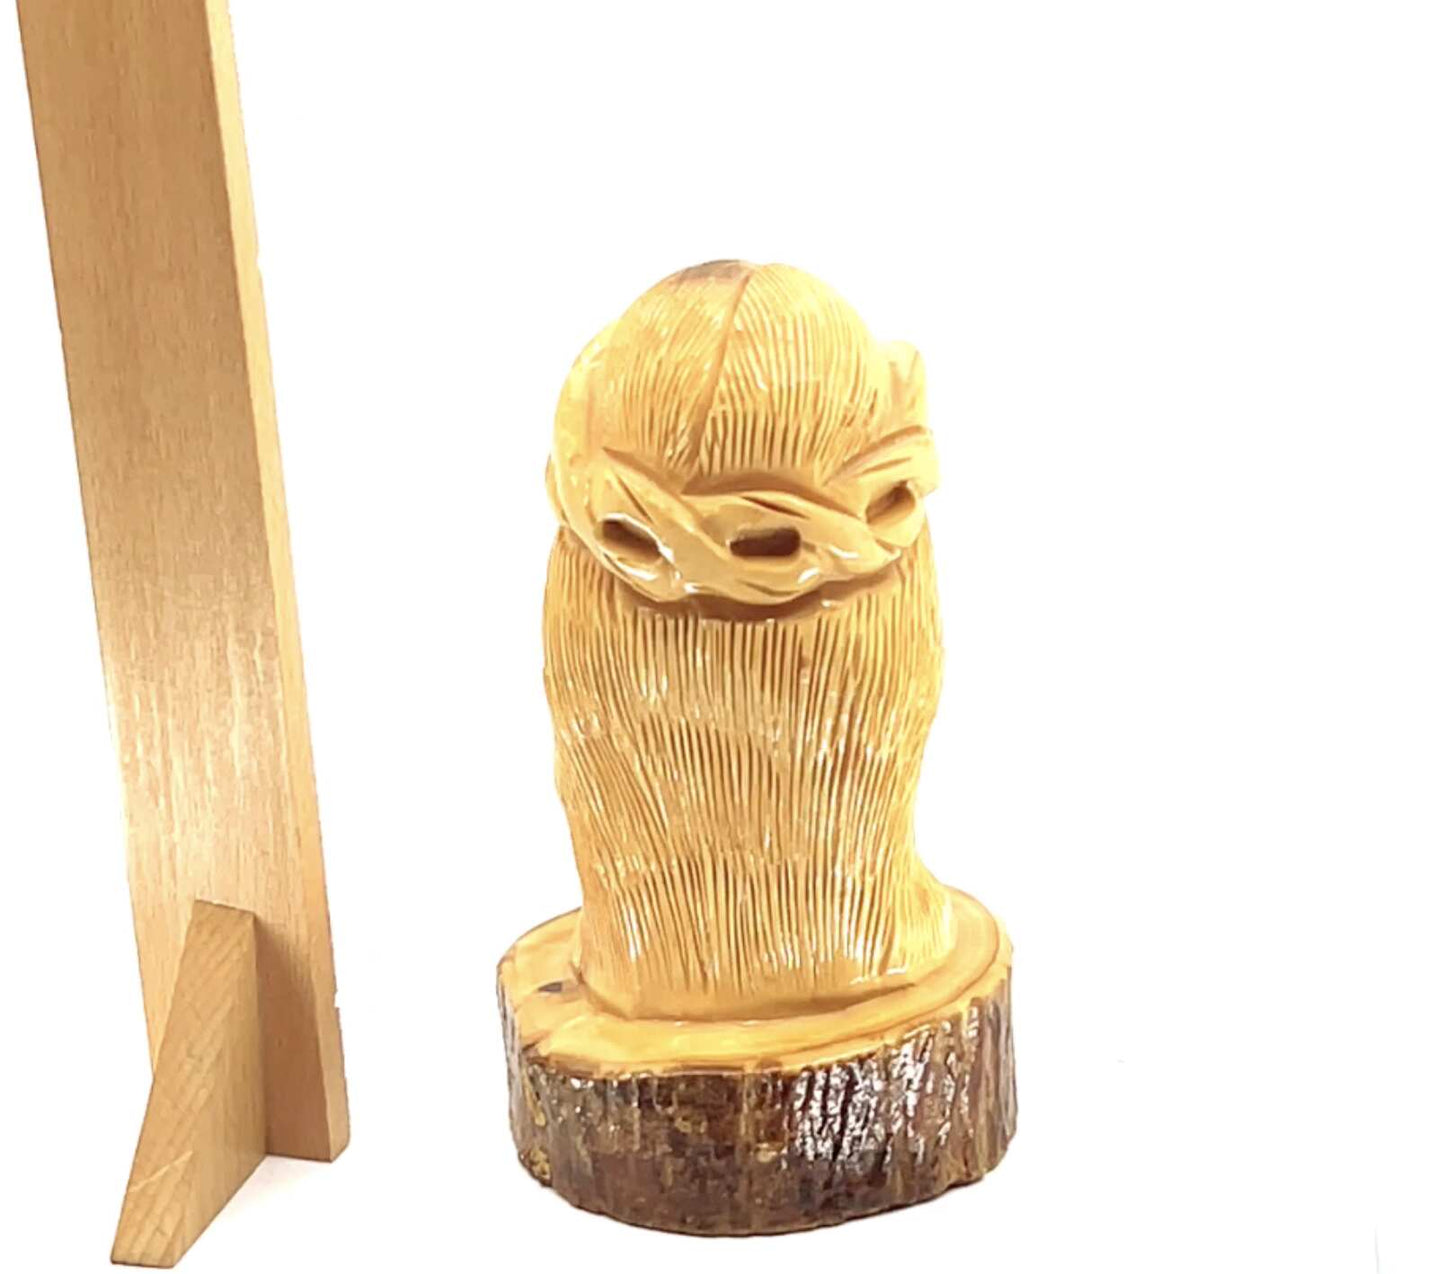 Jesus Christ Bust Carving, 5.9" Carving from Holy Land Olive Wood